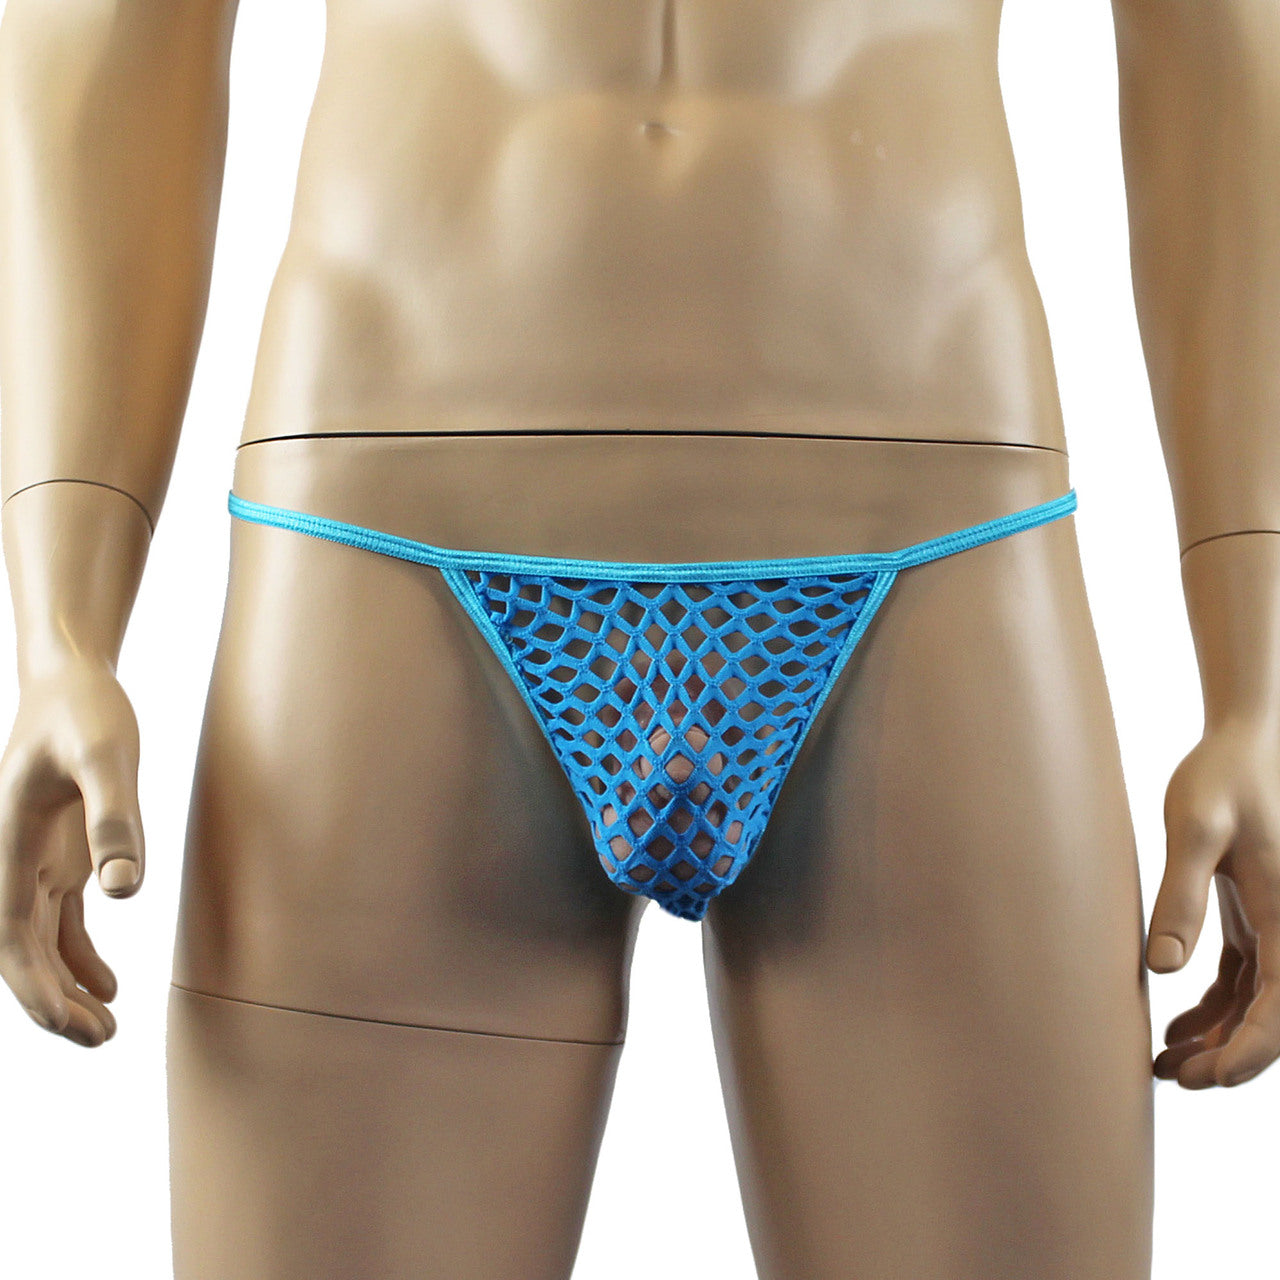 Mens Big Net Lingerie See-through Pouch G string Turquoise